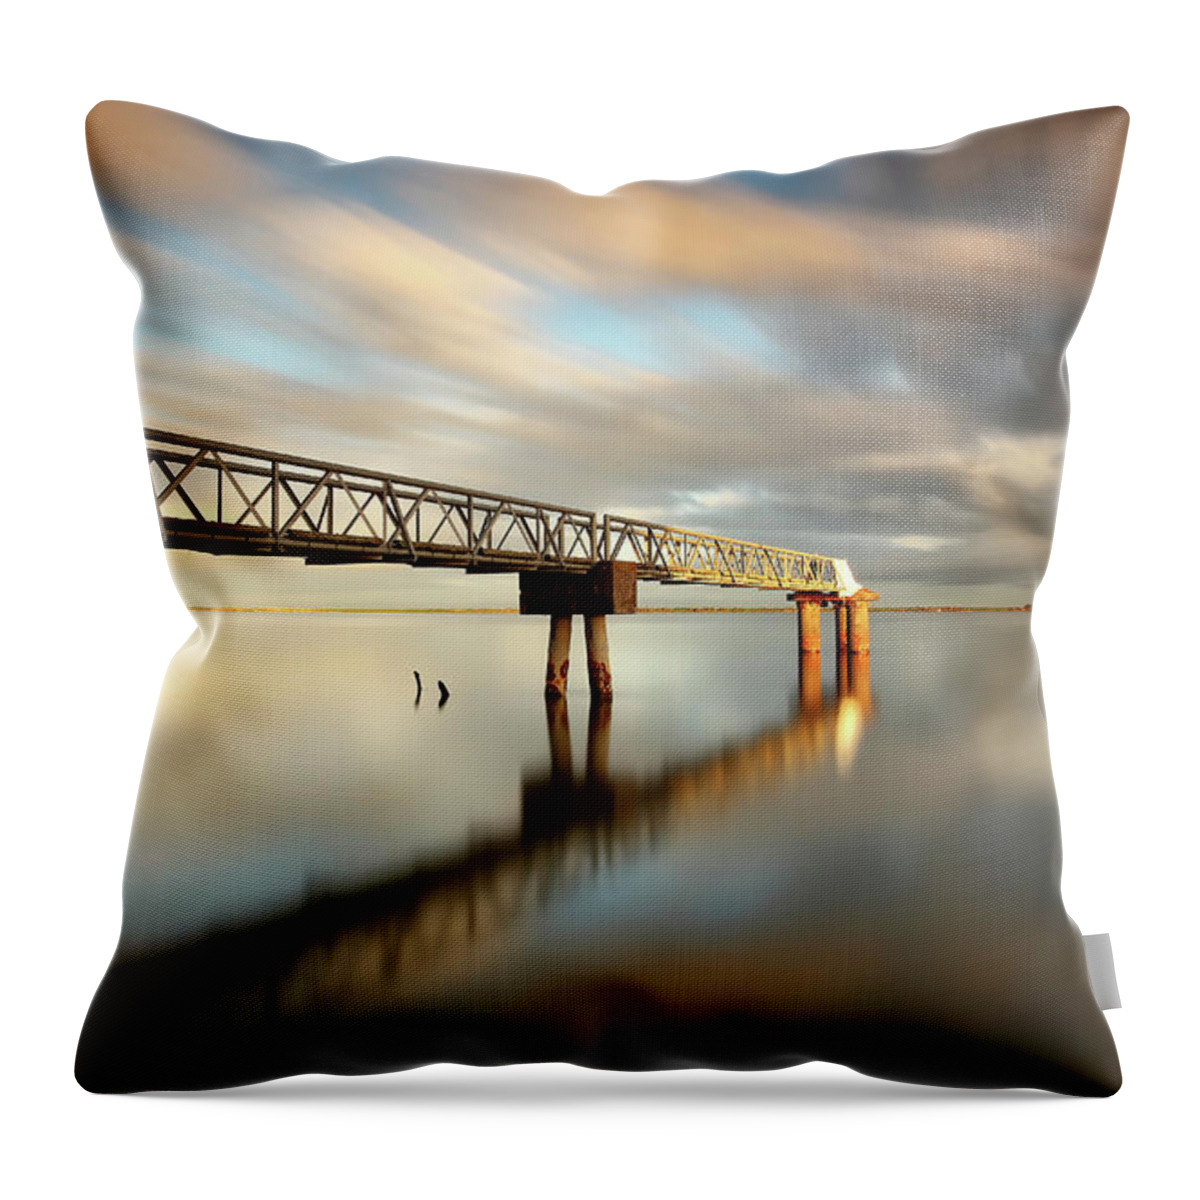 Scenics Throw Pillow featuring the photograph Abandoned Pier by Searching For The Light